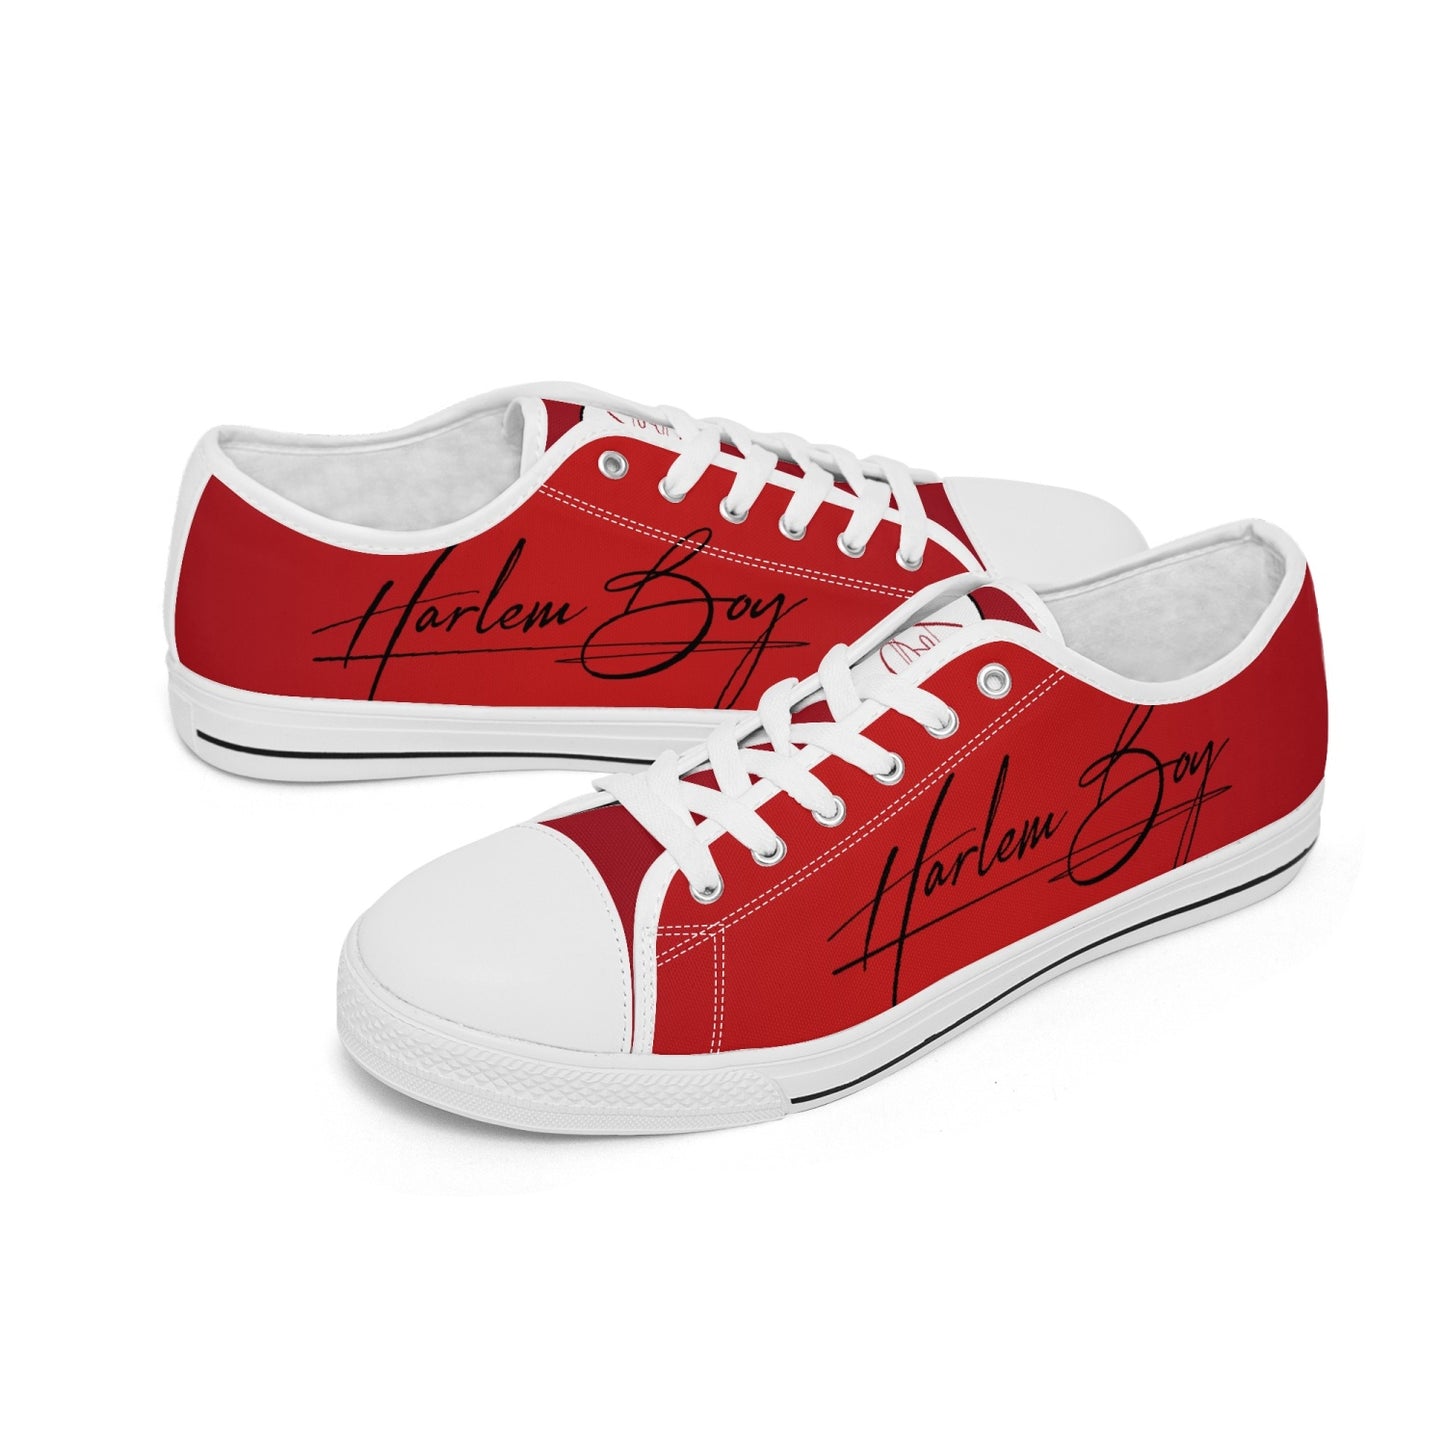 Harlem Boy "Lenox Ave" Unisex Classic Low Tops - Ruby (Black or White Sole)